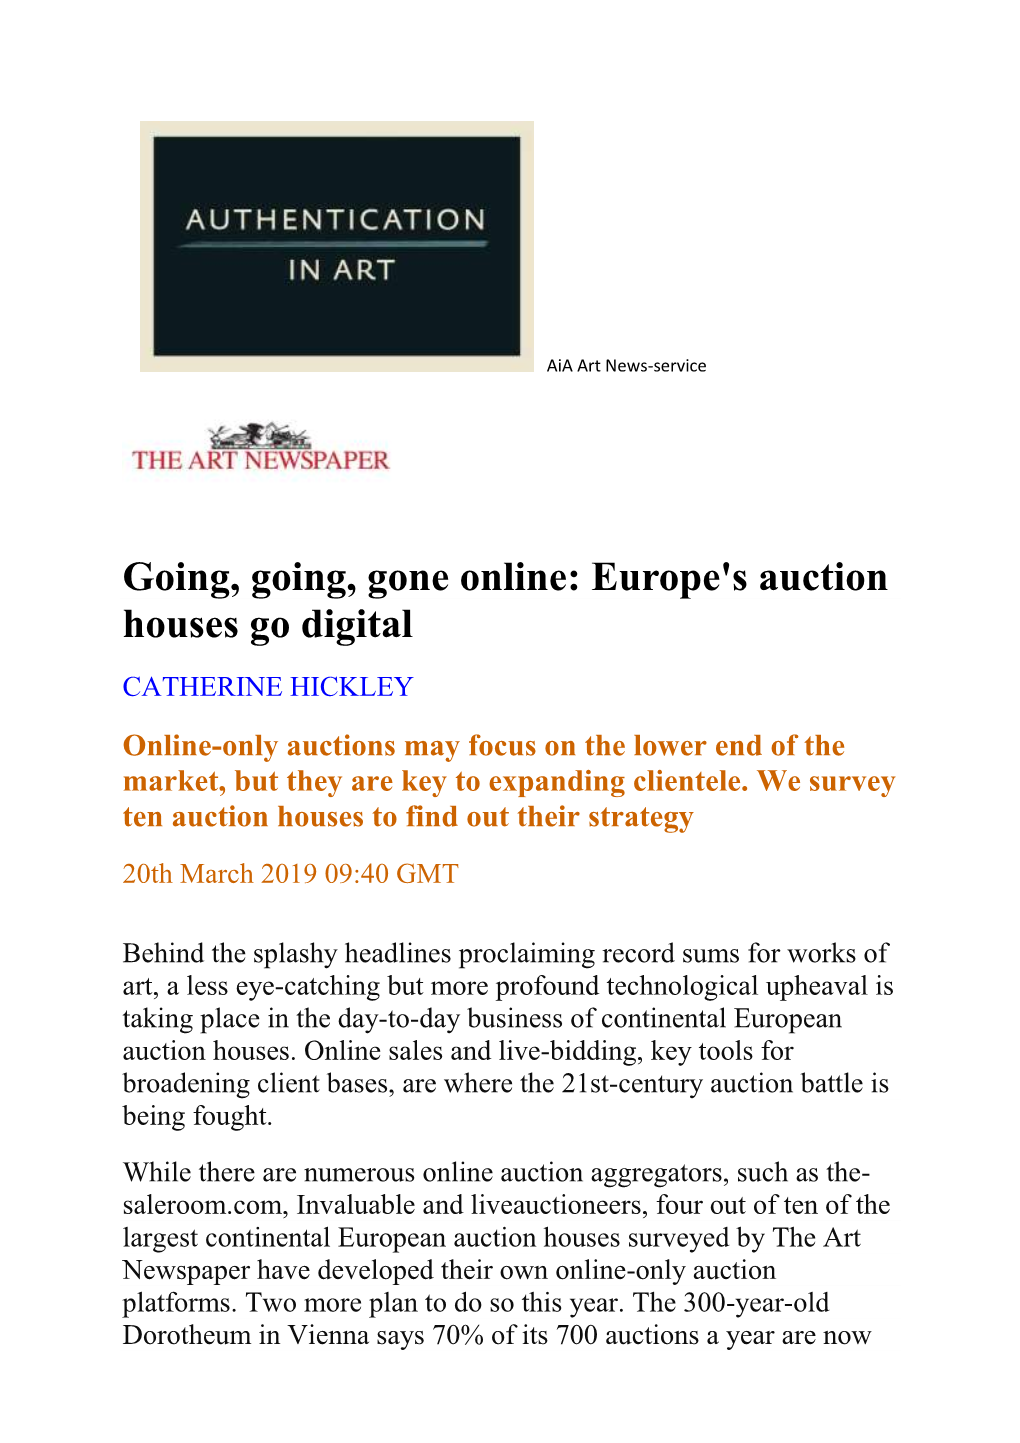 Europe's Auction Houses Go Digital CATHERINE HICKLEY Online-Only Auctions May Focus on the Lower End of the Market, but They Are Key to Expanding Clientele